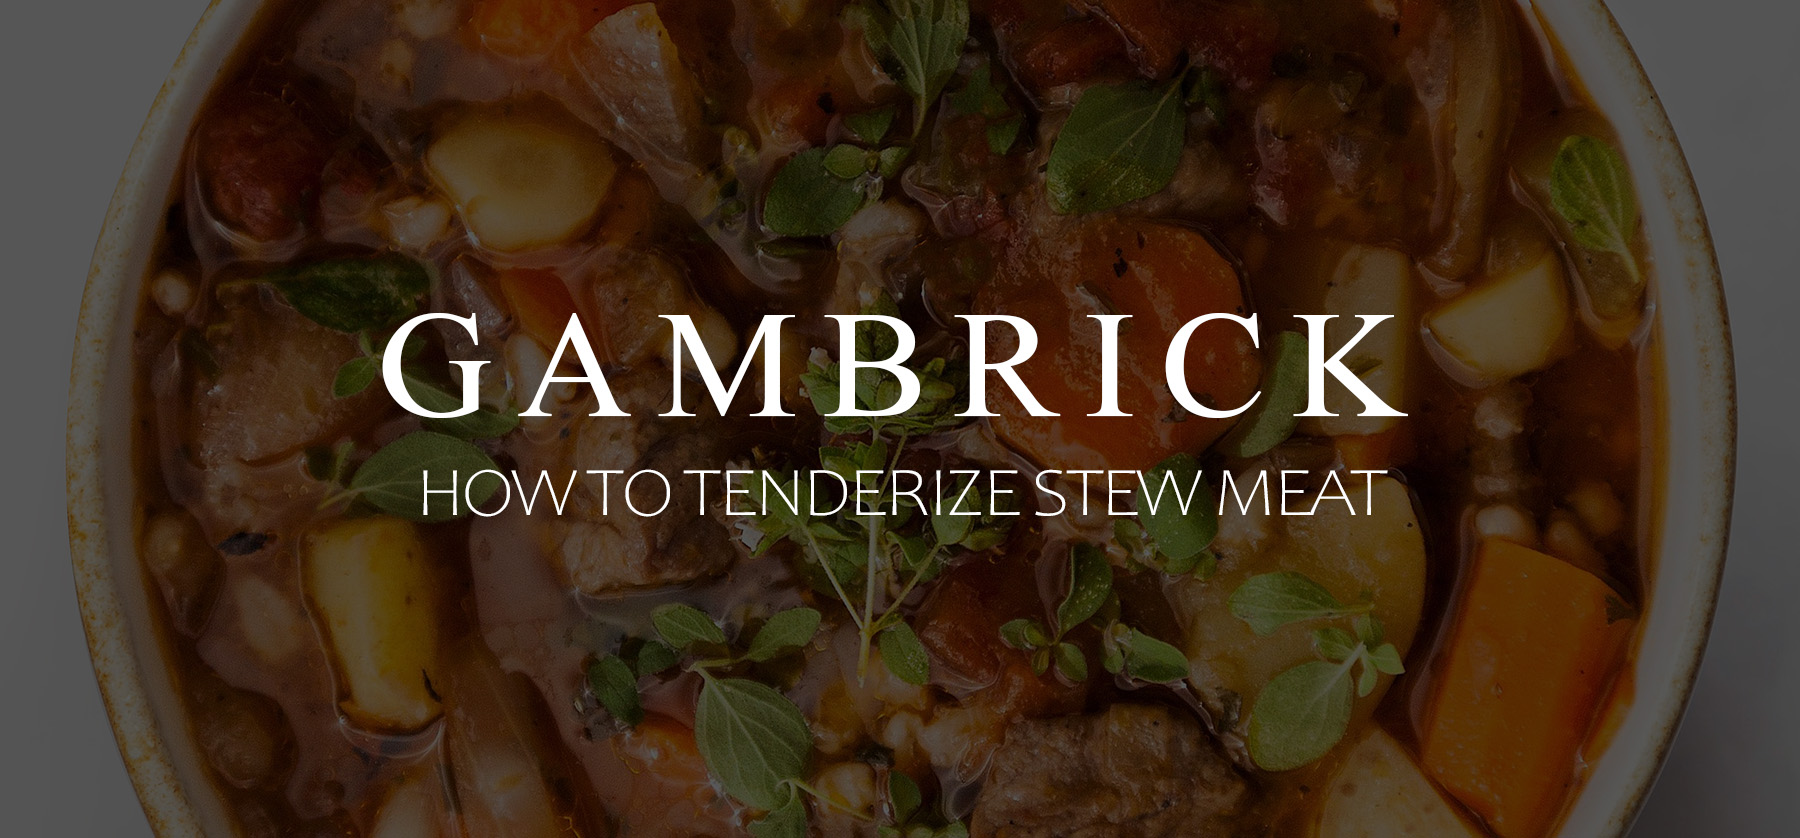 how to tenderize stew meat banner 1.0